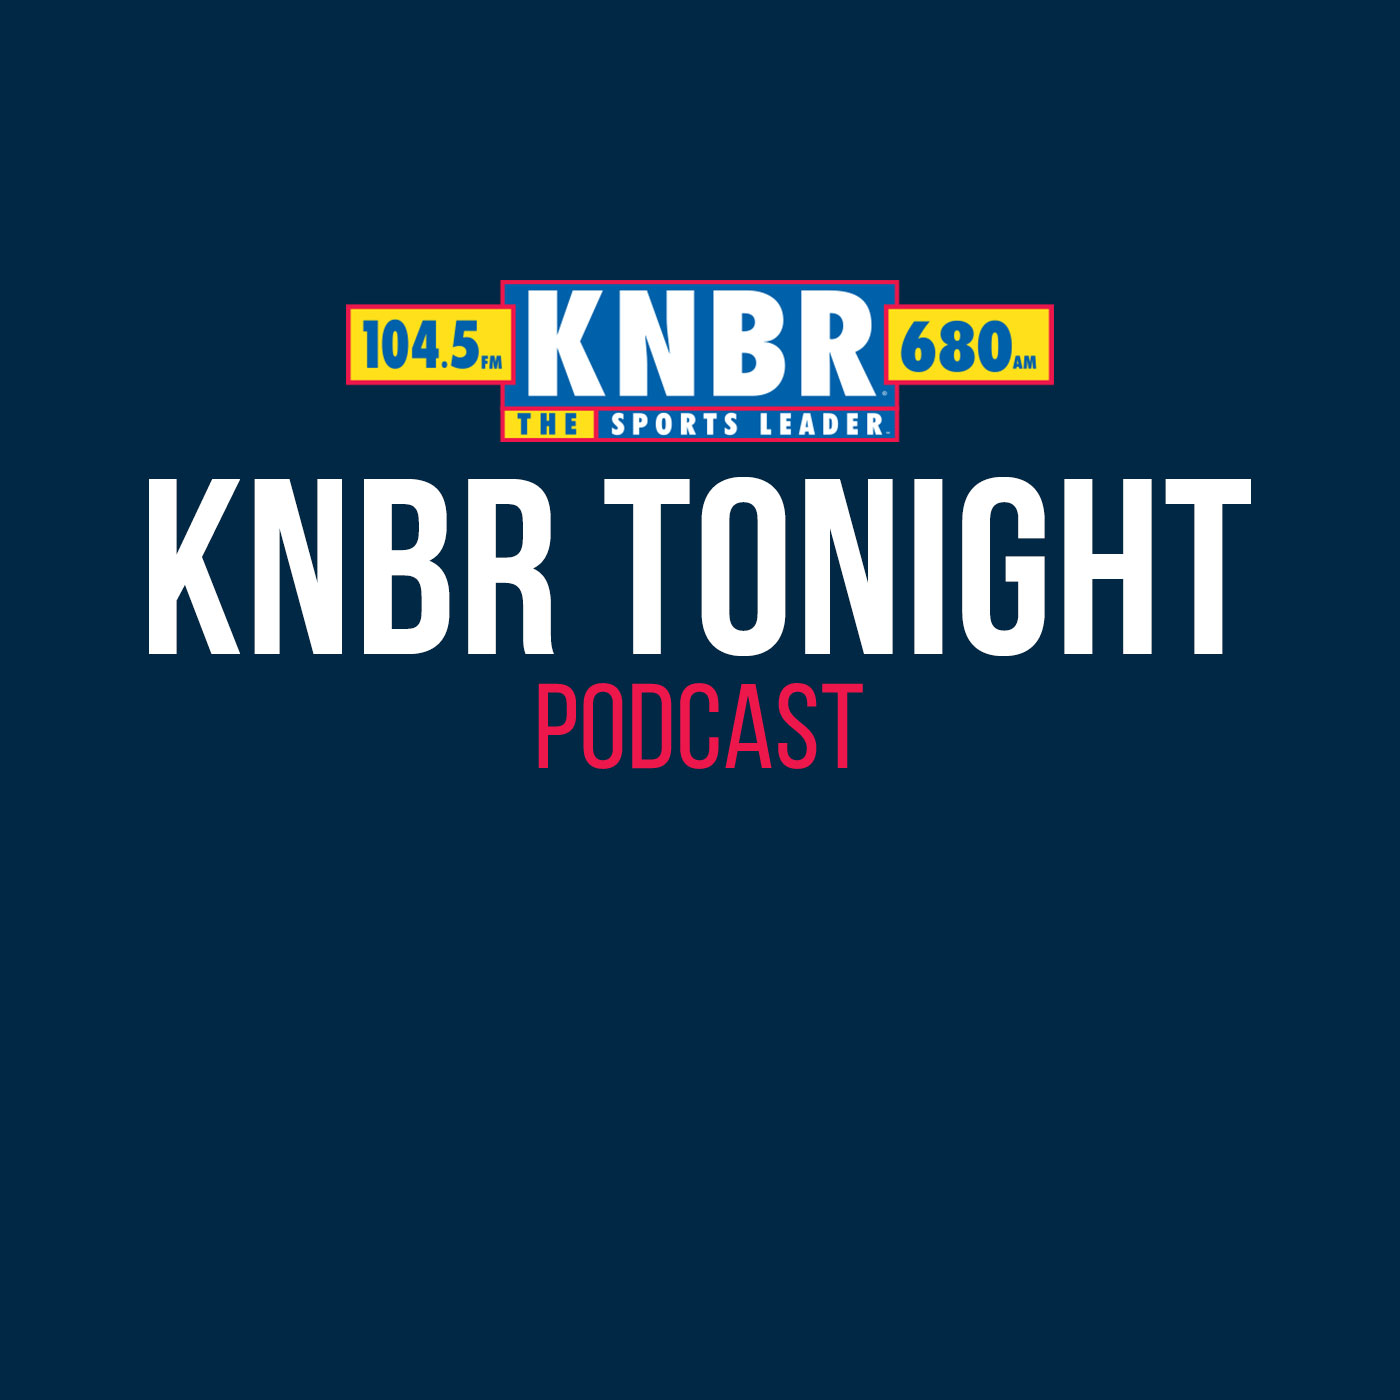 12-10 MMQB's Colton Orr Joins Dieter on KNBR Tonight to Breakdown the State of the NFL